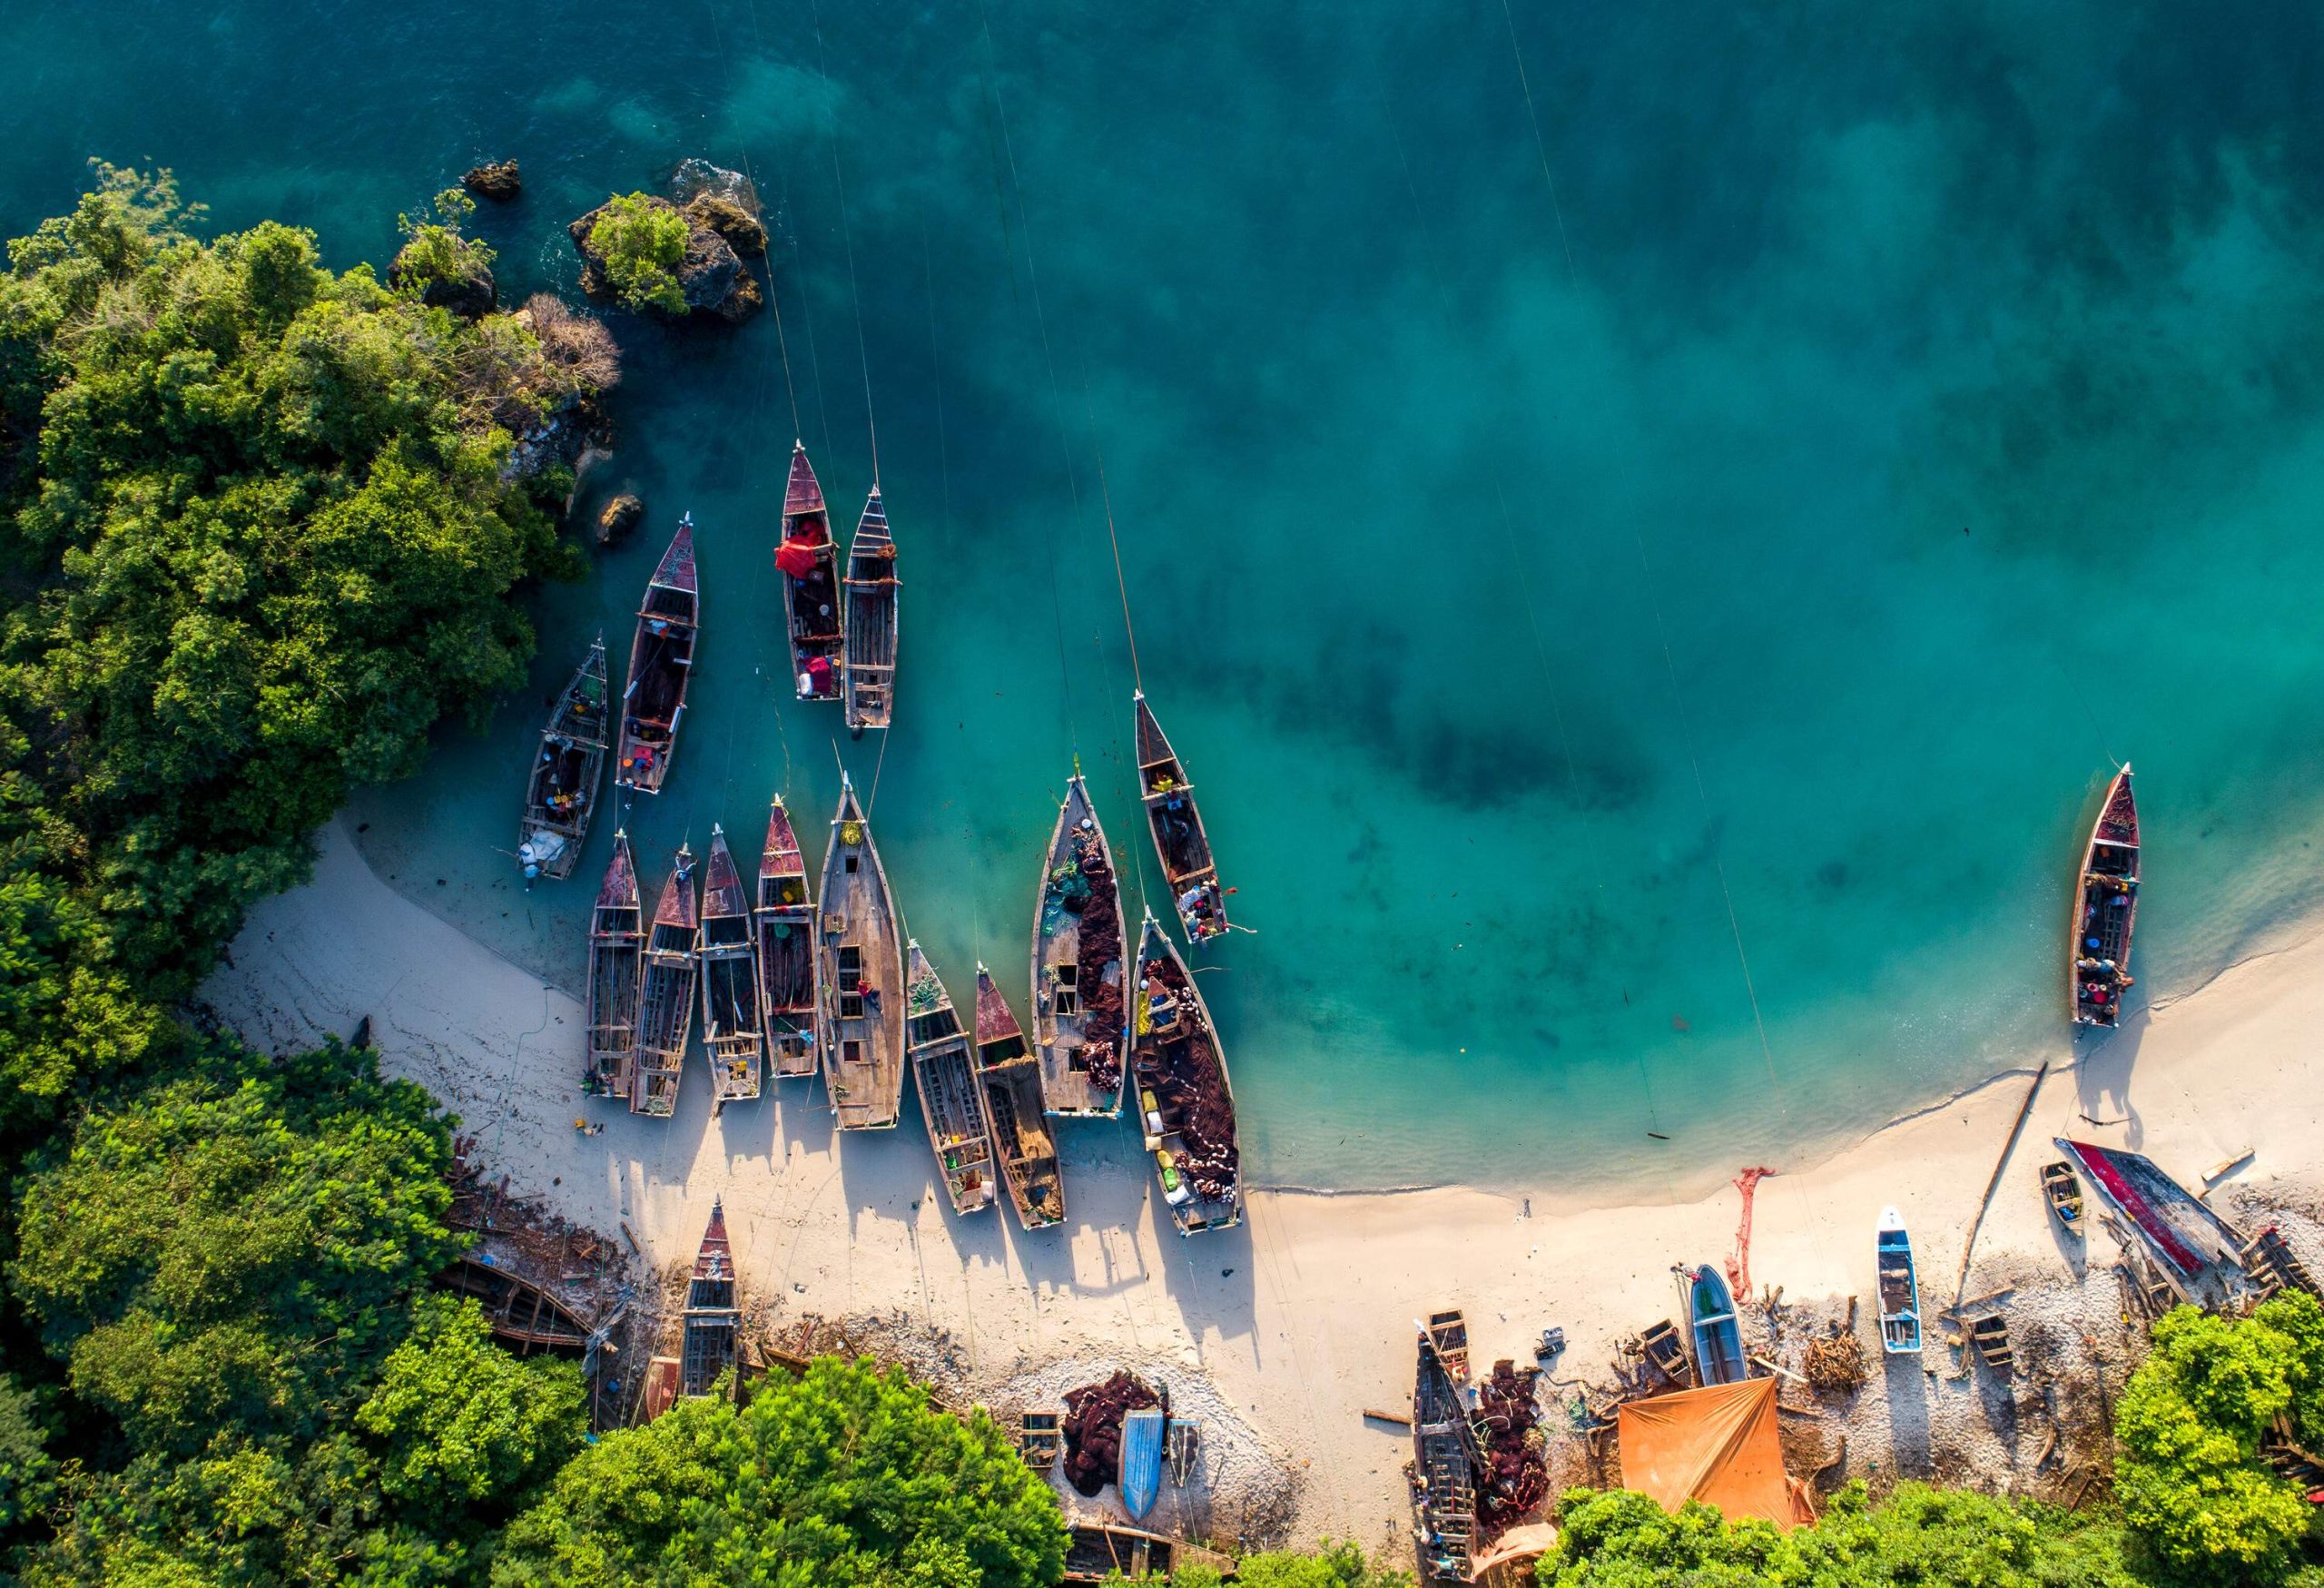 Top view of moored fishing boats on the lush white sand shore of a tranquil beach.